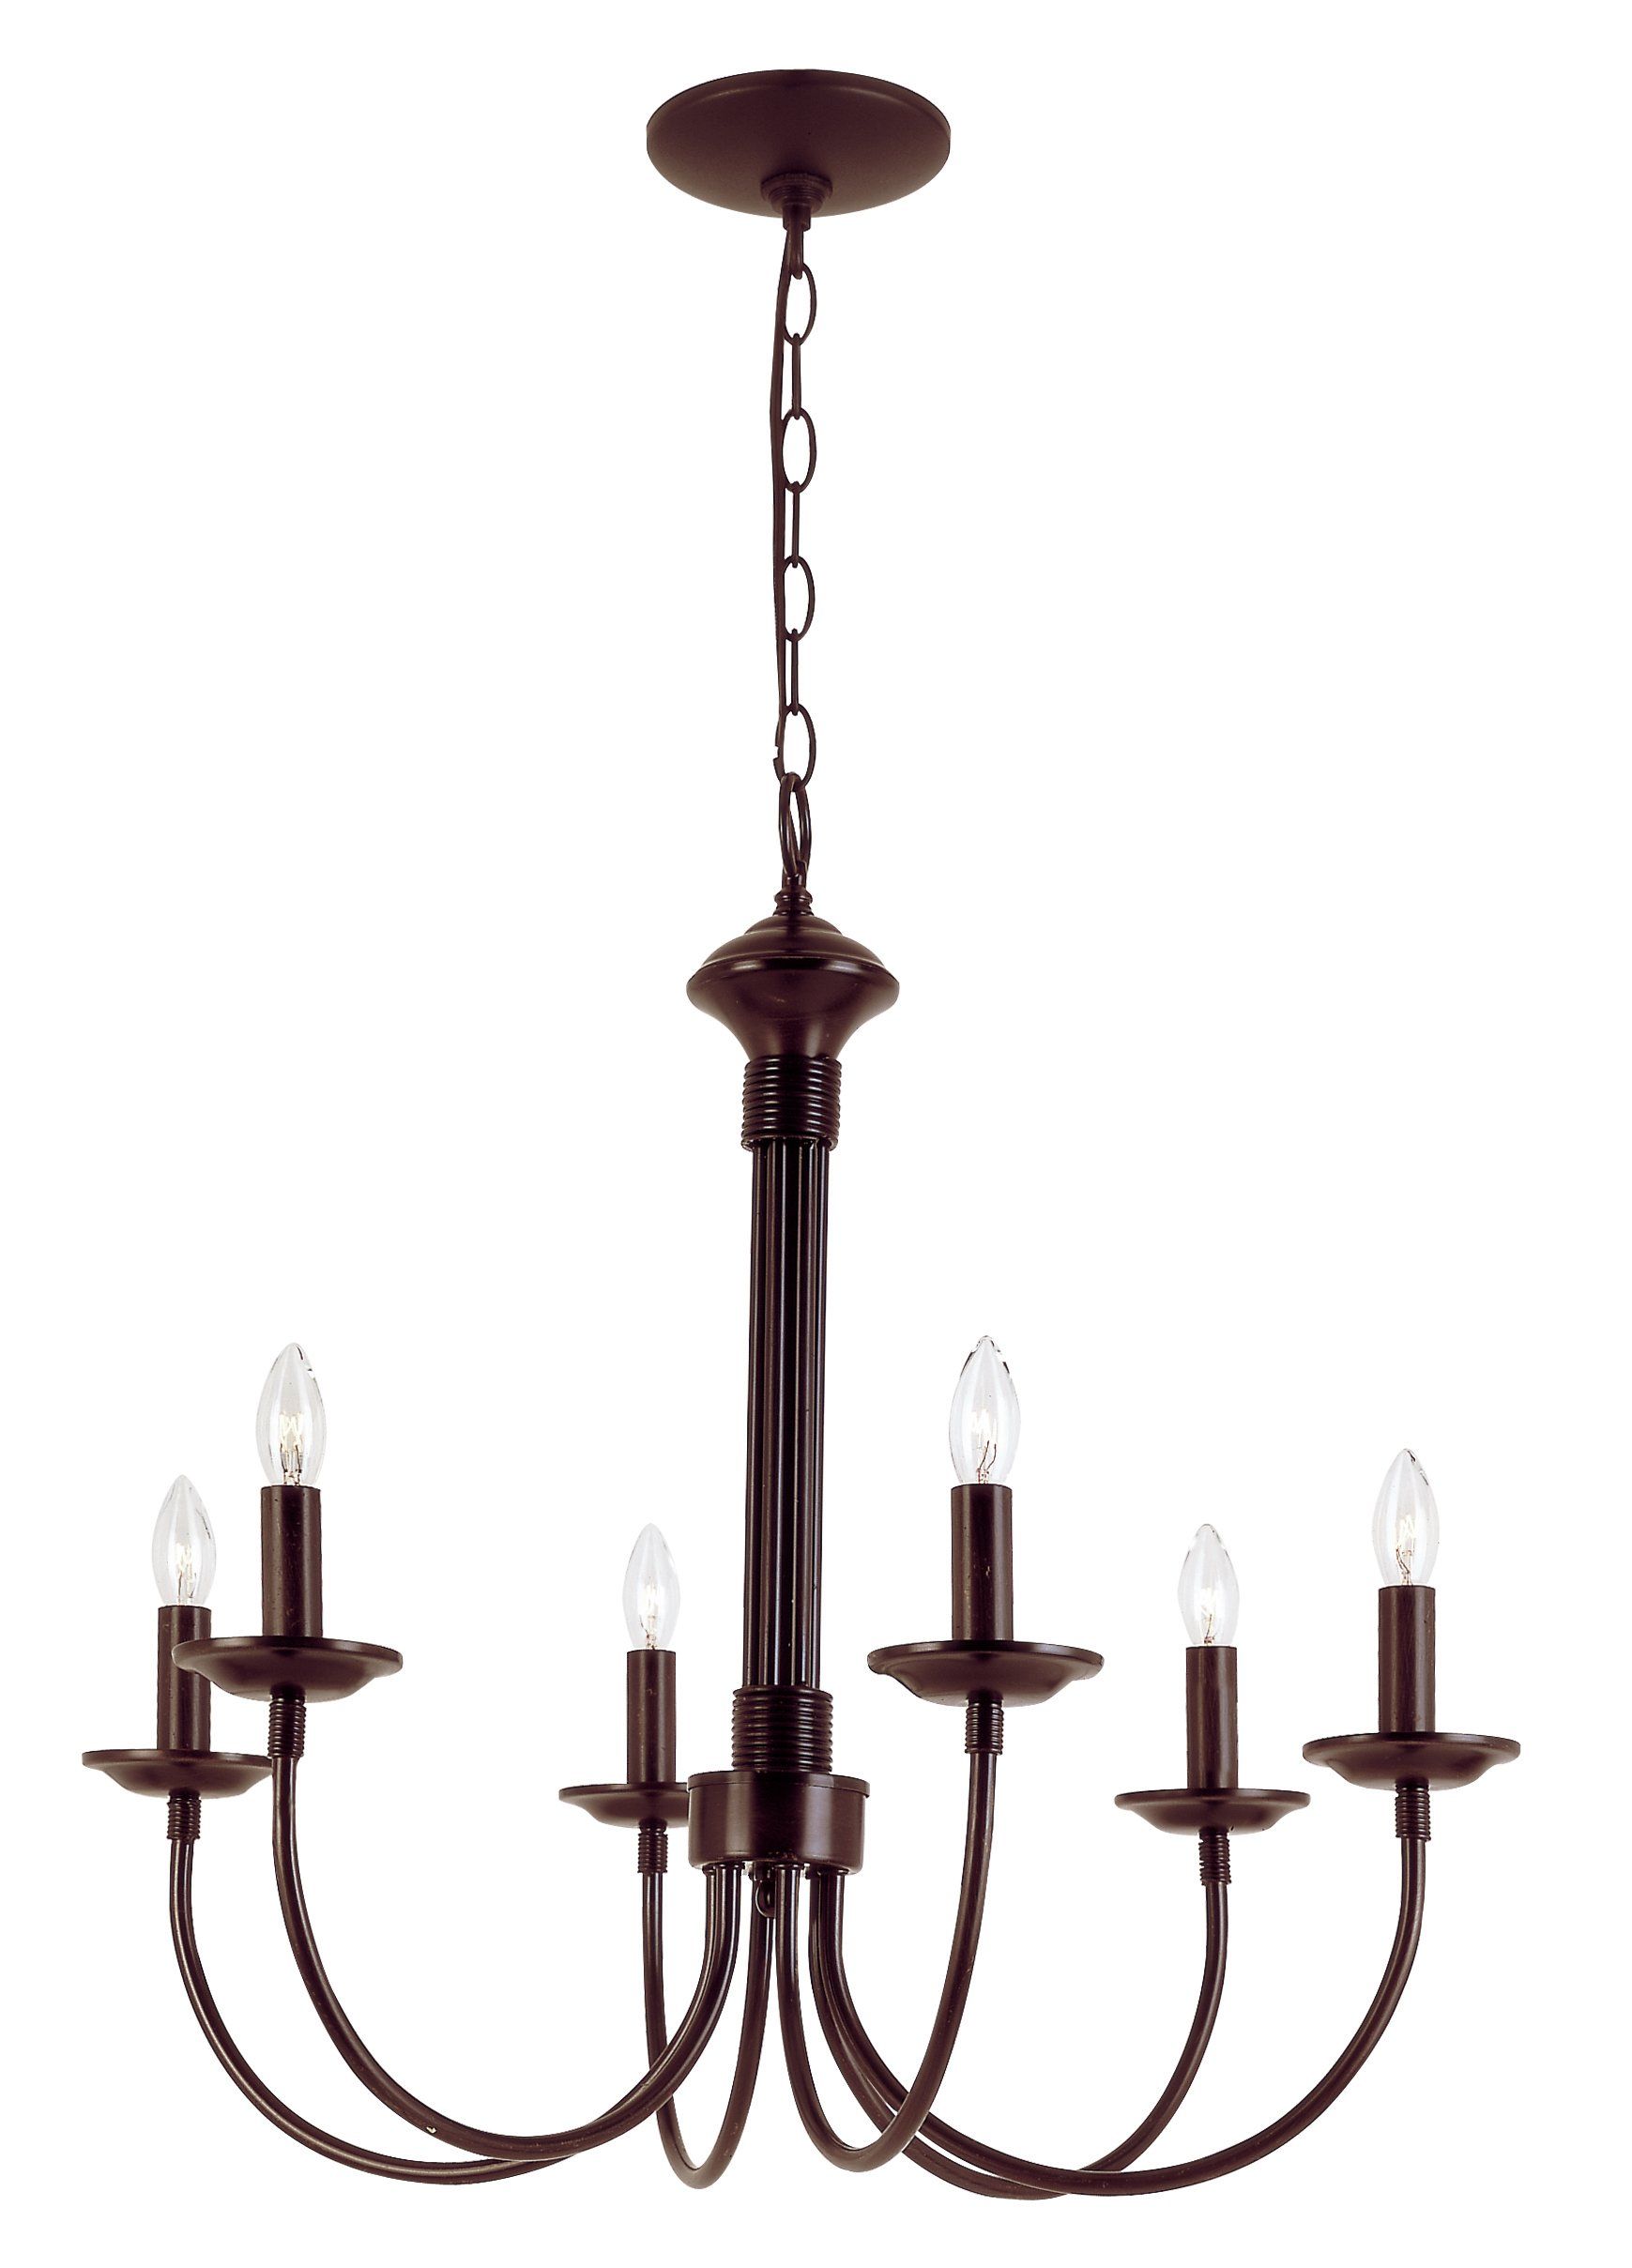 Shaylee 6 Light Candle Style Chandelier With Shaylee 8 Light Candle Style Chandeliers (View 9 of 30)